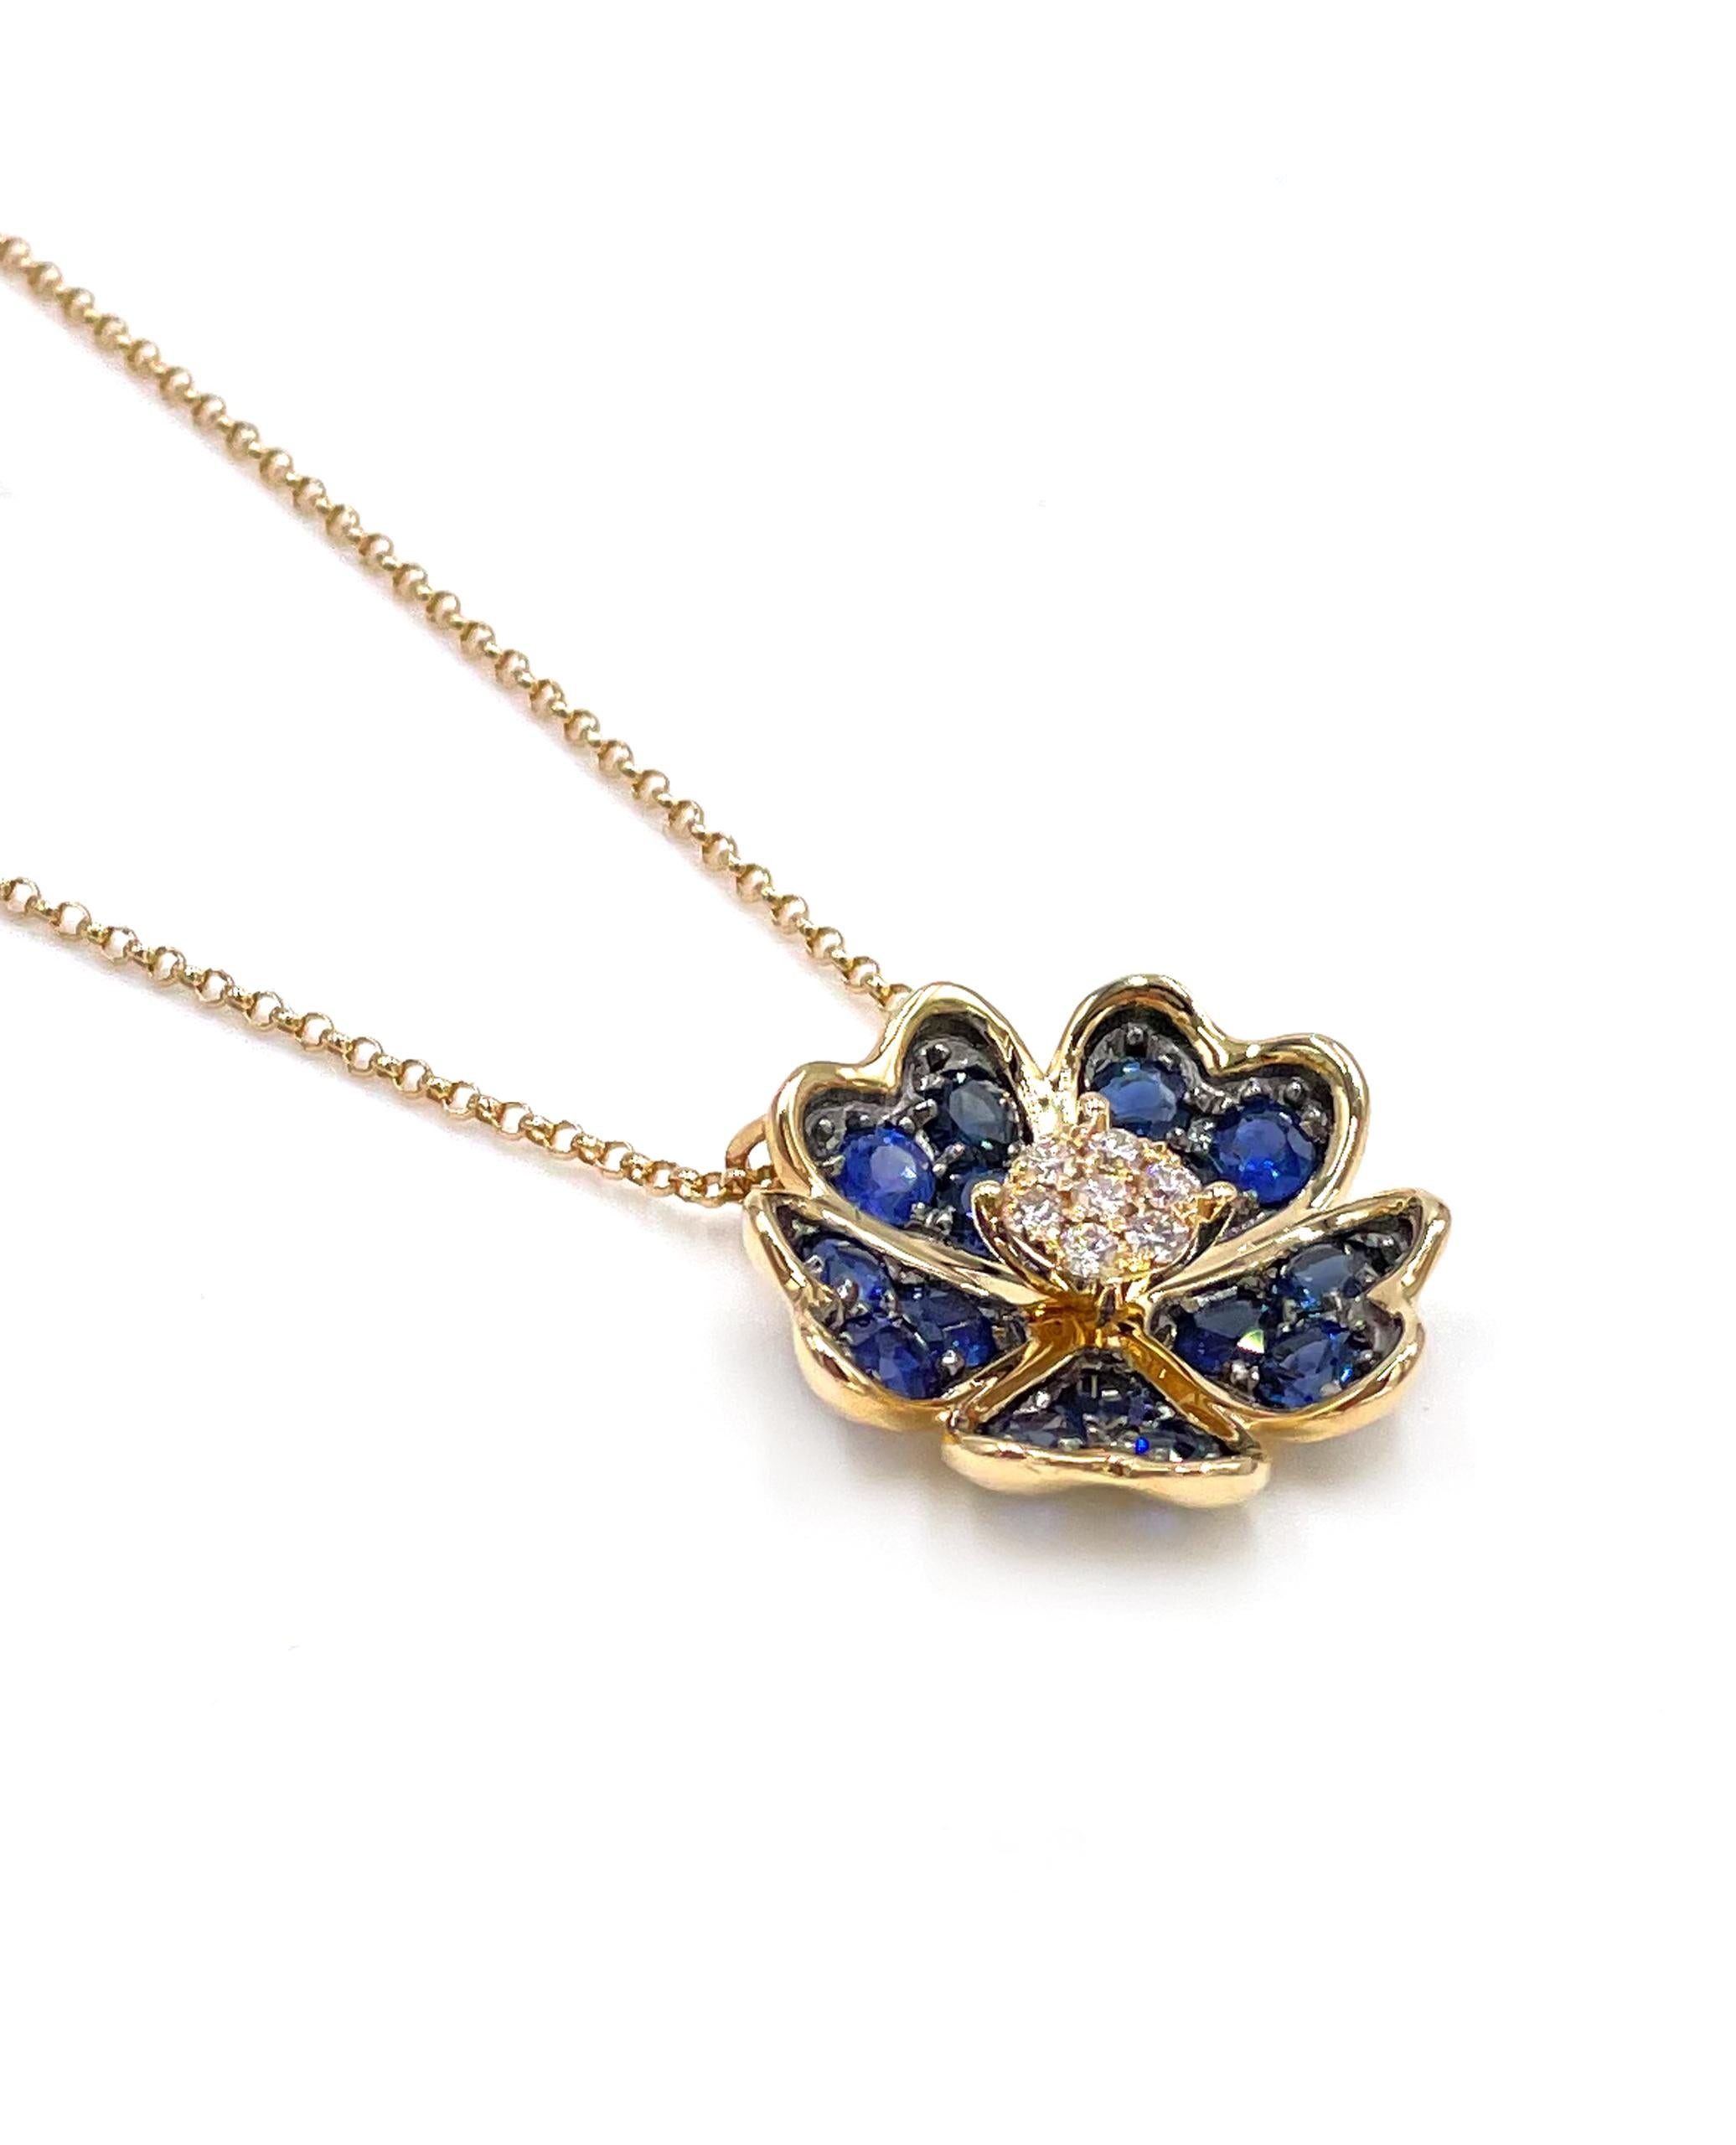 14K yellow gold flower pendant necklace furnished with round faceted diamonds weighing  0.11 carats total weight and round faceted blue sapphires weighing 1.20 carats total weight.

* Can be worn 16, 17 or 18 inches long.